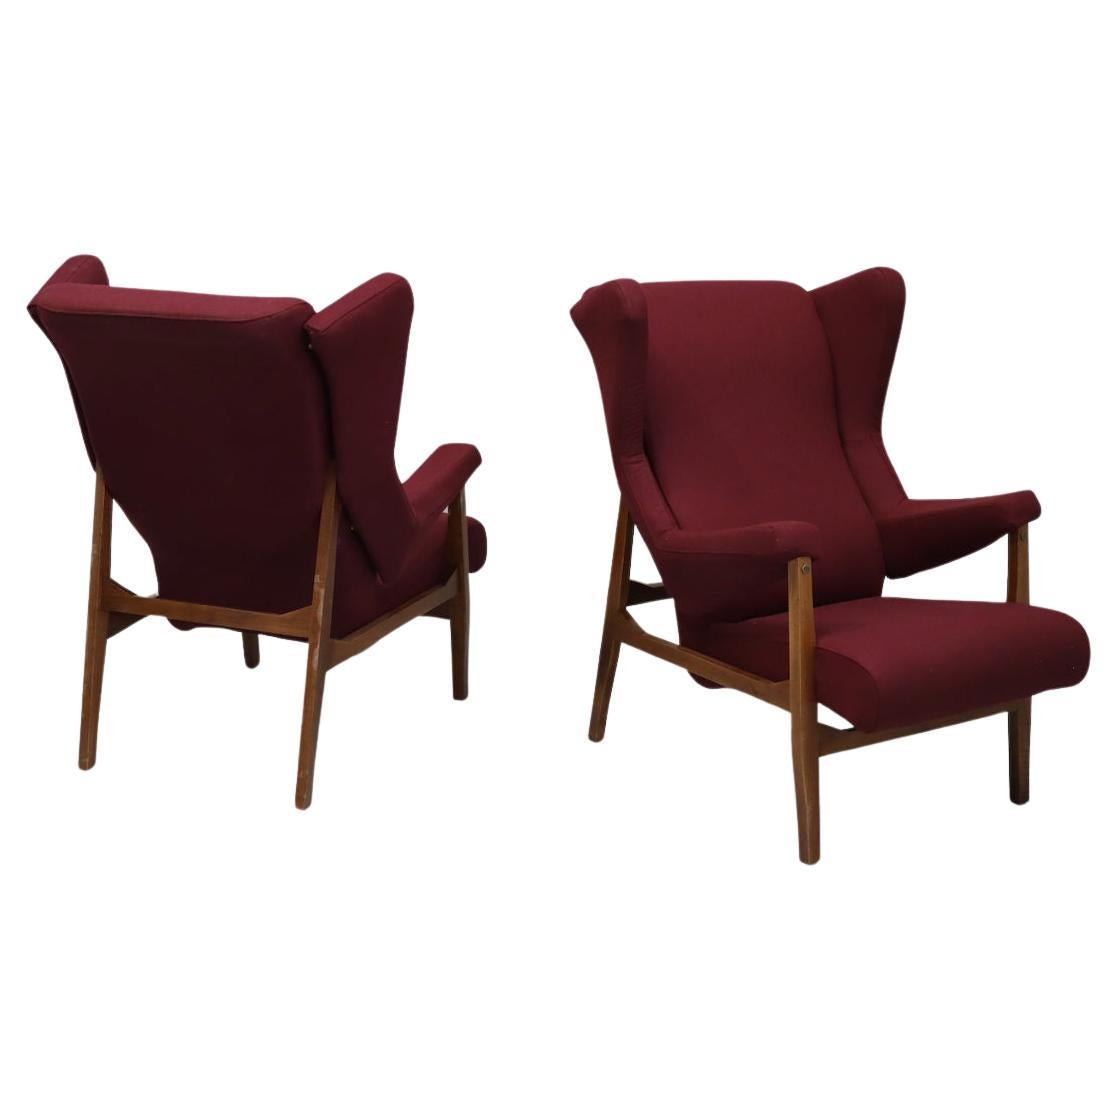 Rare Pair "Fiorenza" First Edition Armchairs by Franco Albini, Italy, c. 1953 For Sale